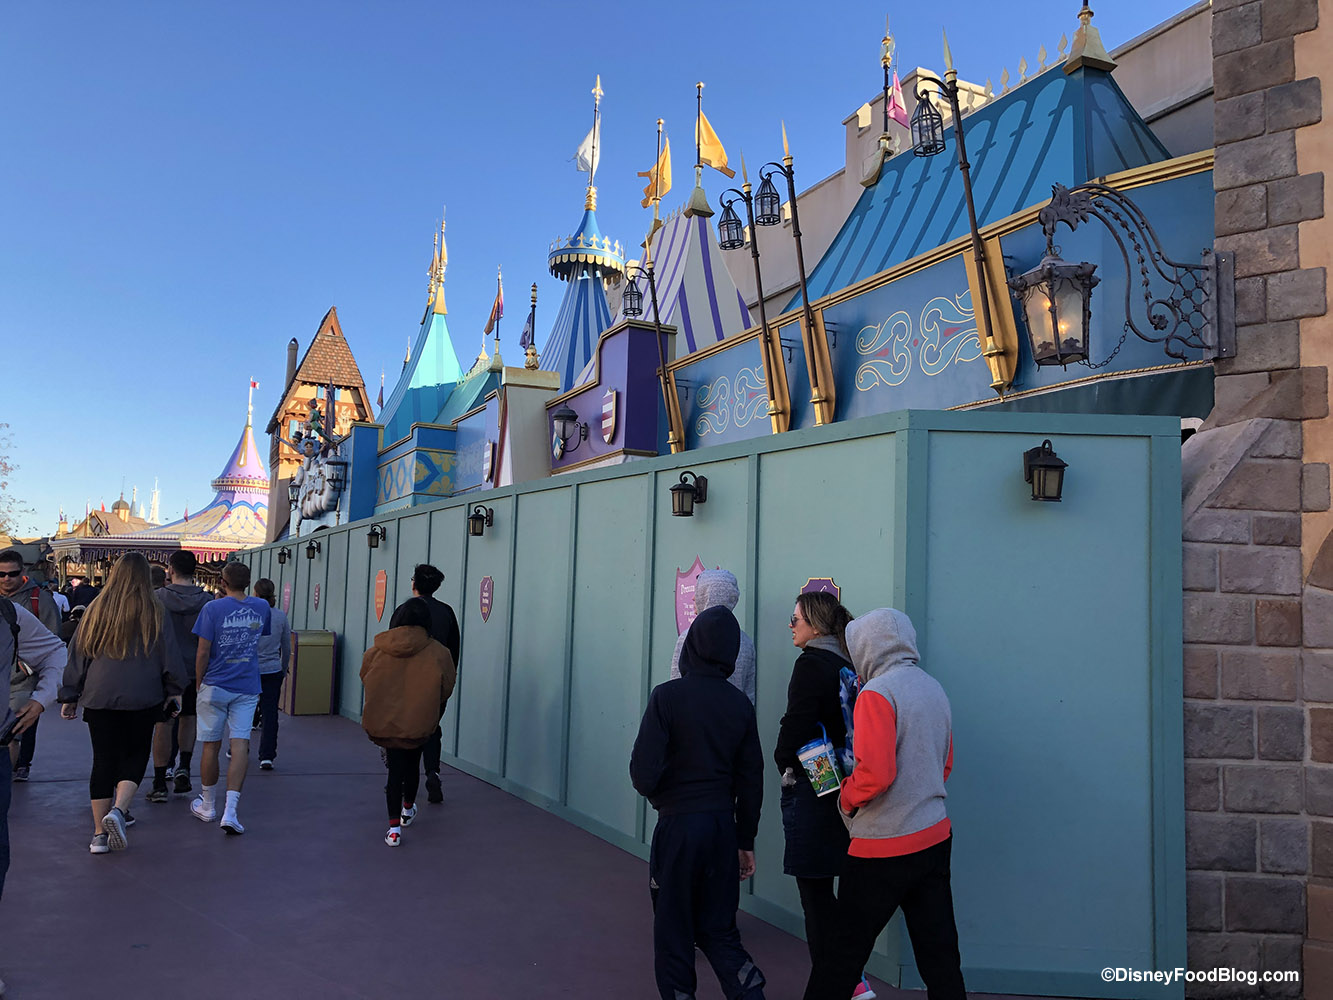 News Disney World S Peter Pan Ride Is Closed Find Out When Guests Will Fly Again The Disney Food Blog